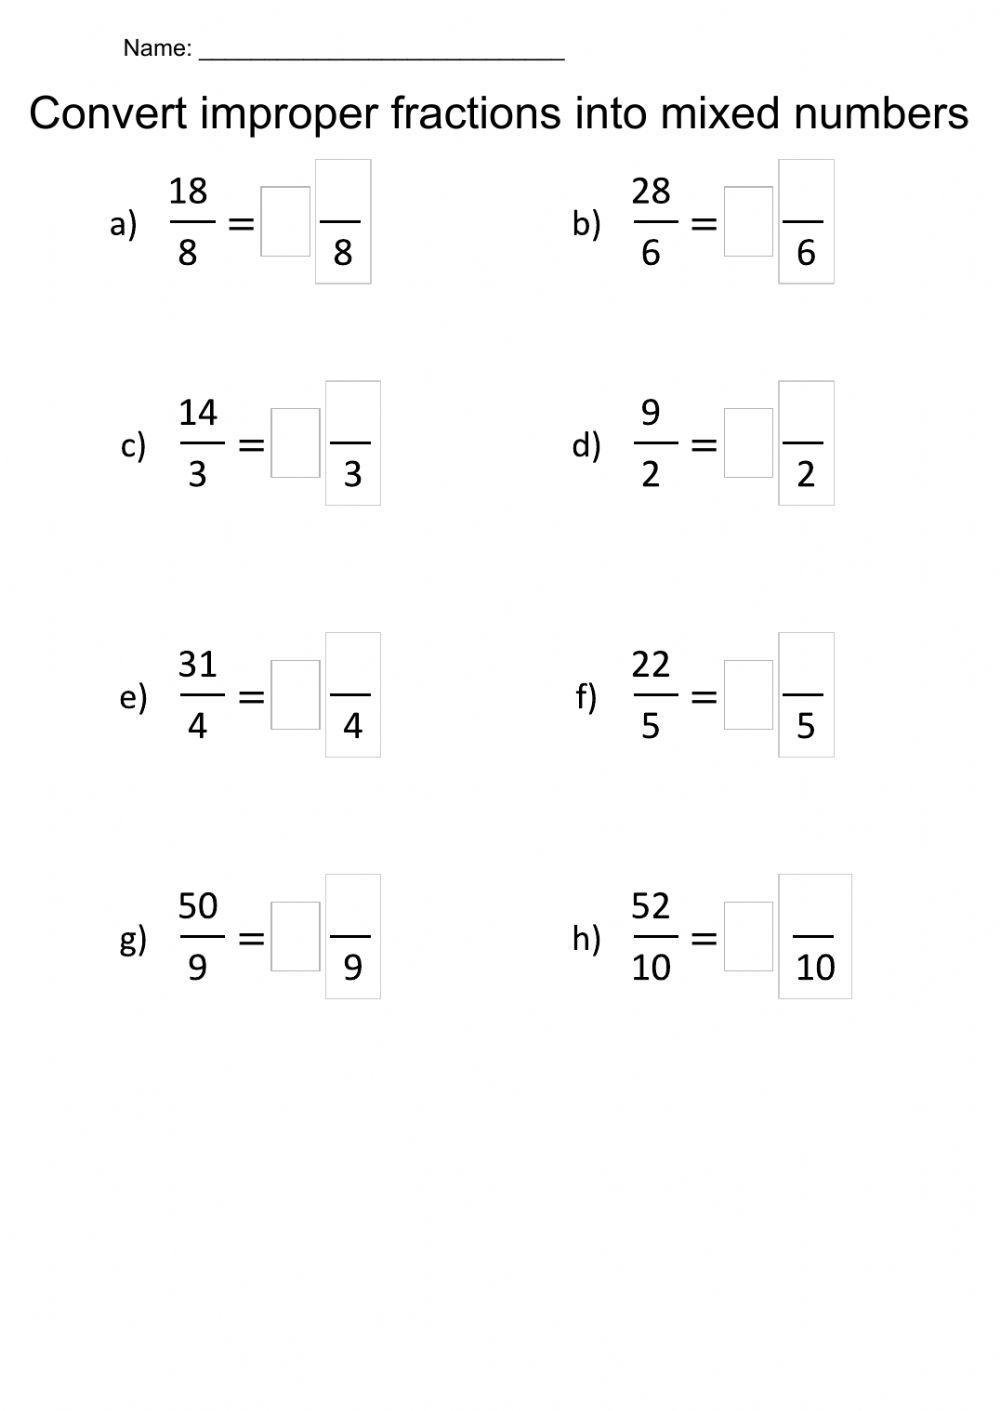 Improper fractions to mixed numbers